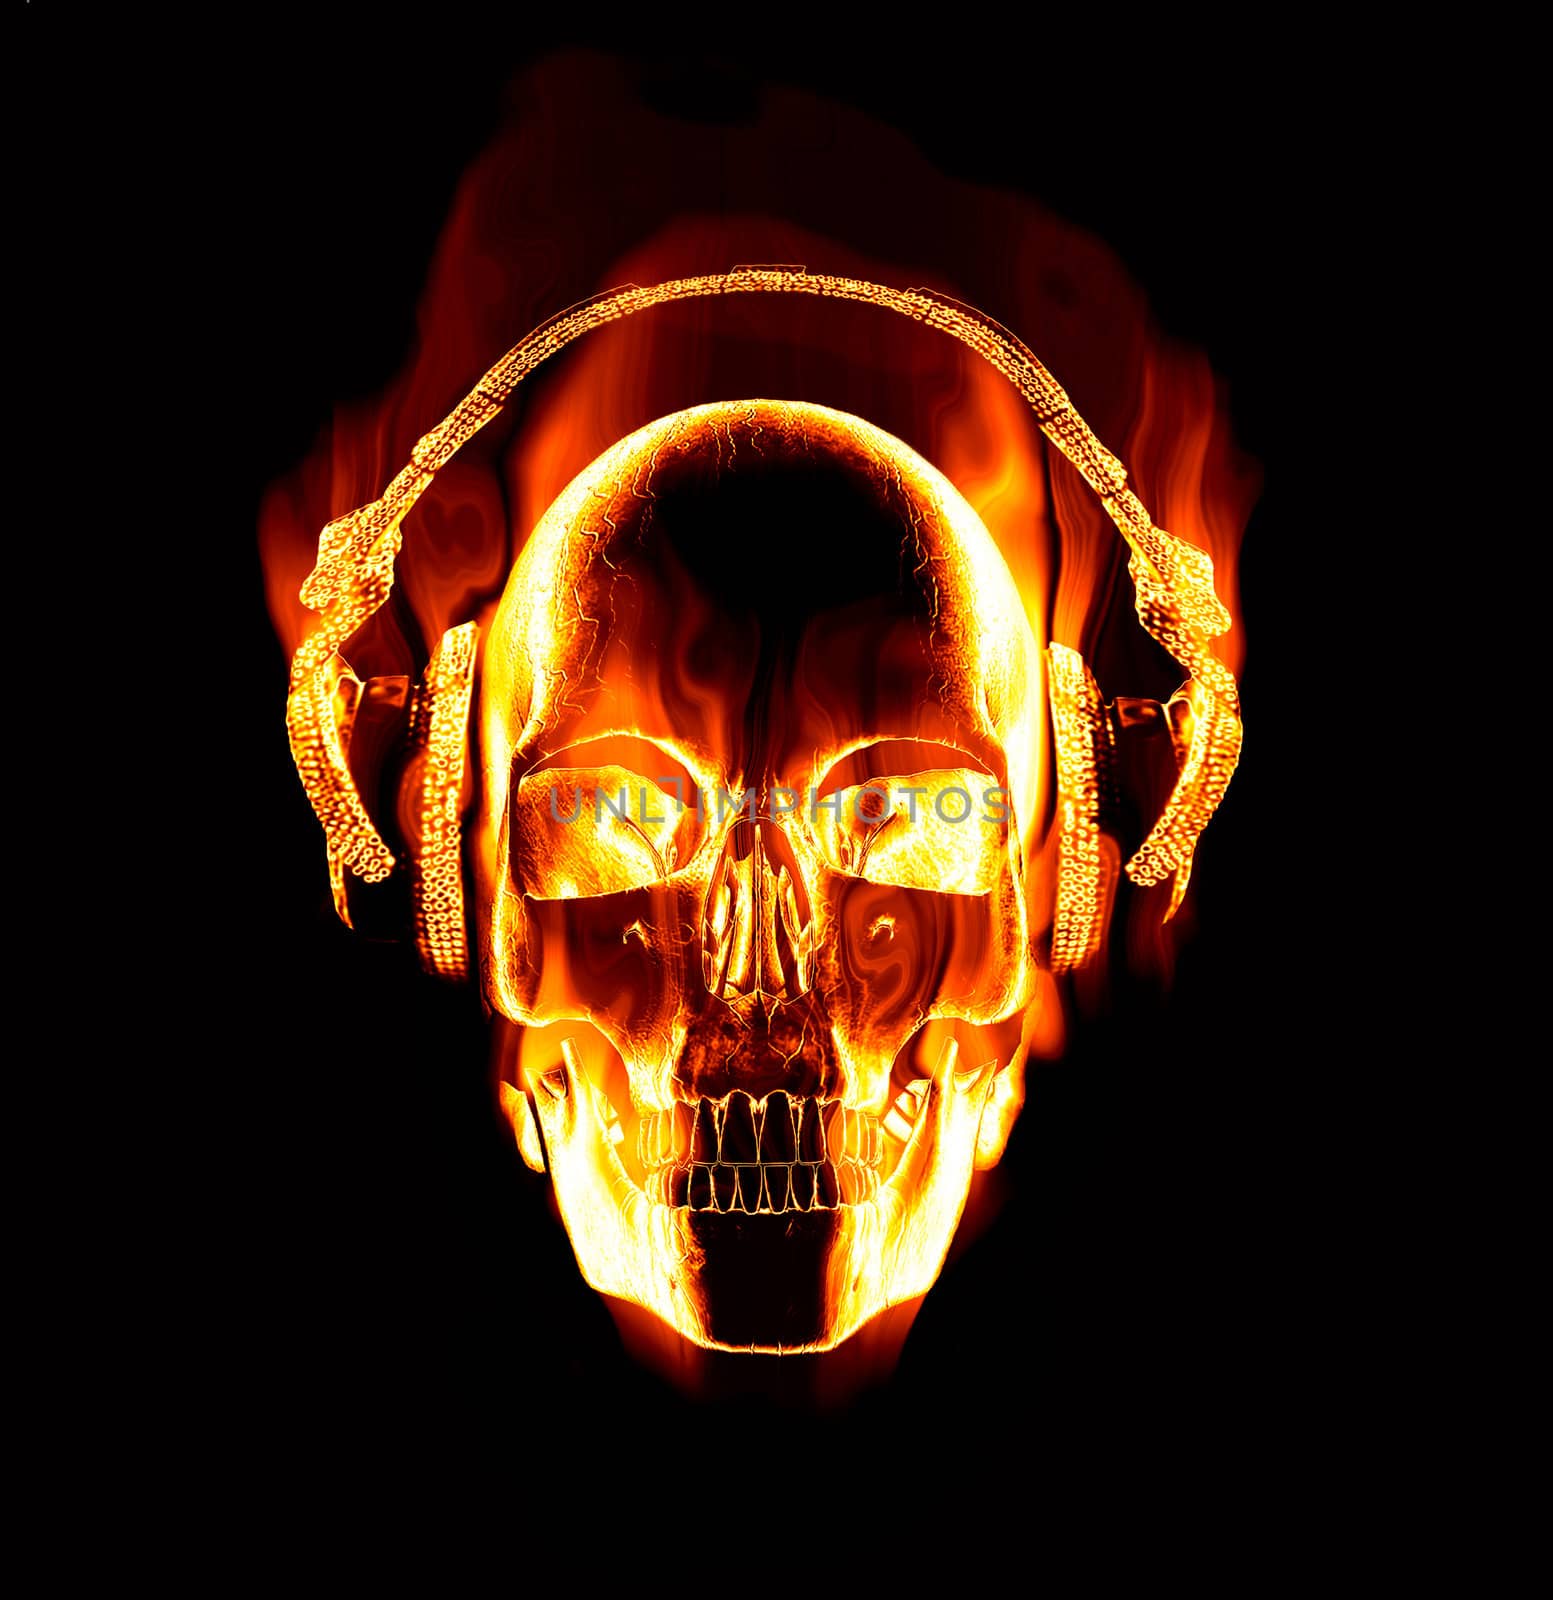 flaming skull with headphones by clearviewstock